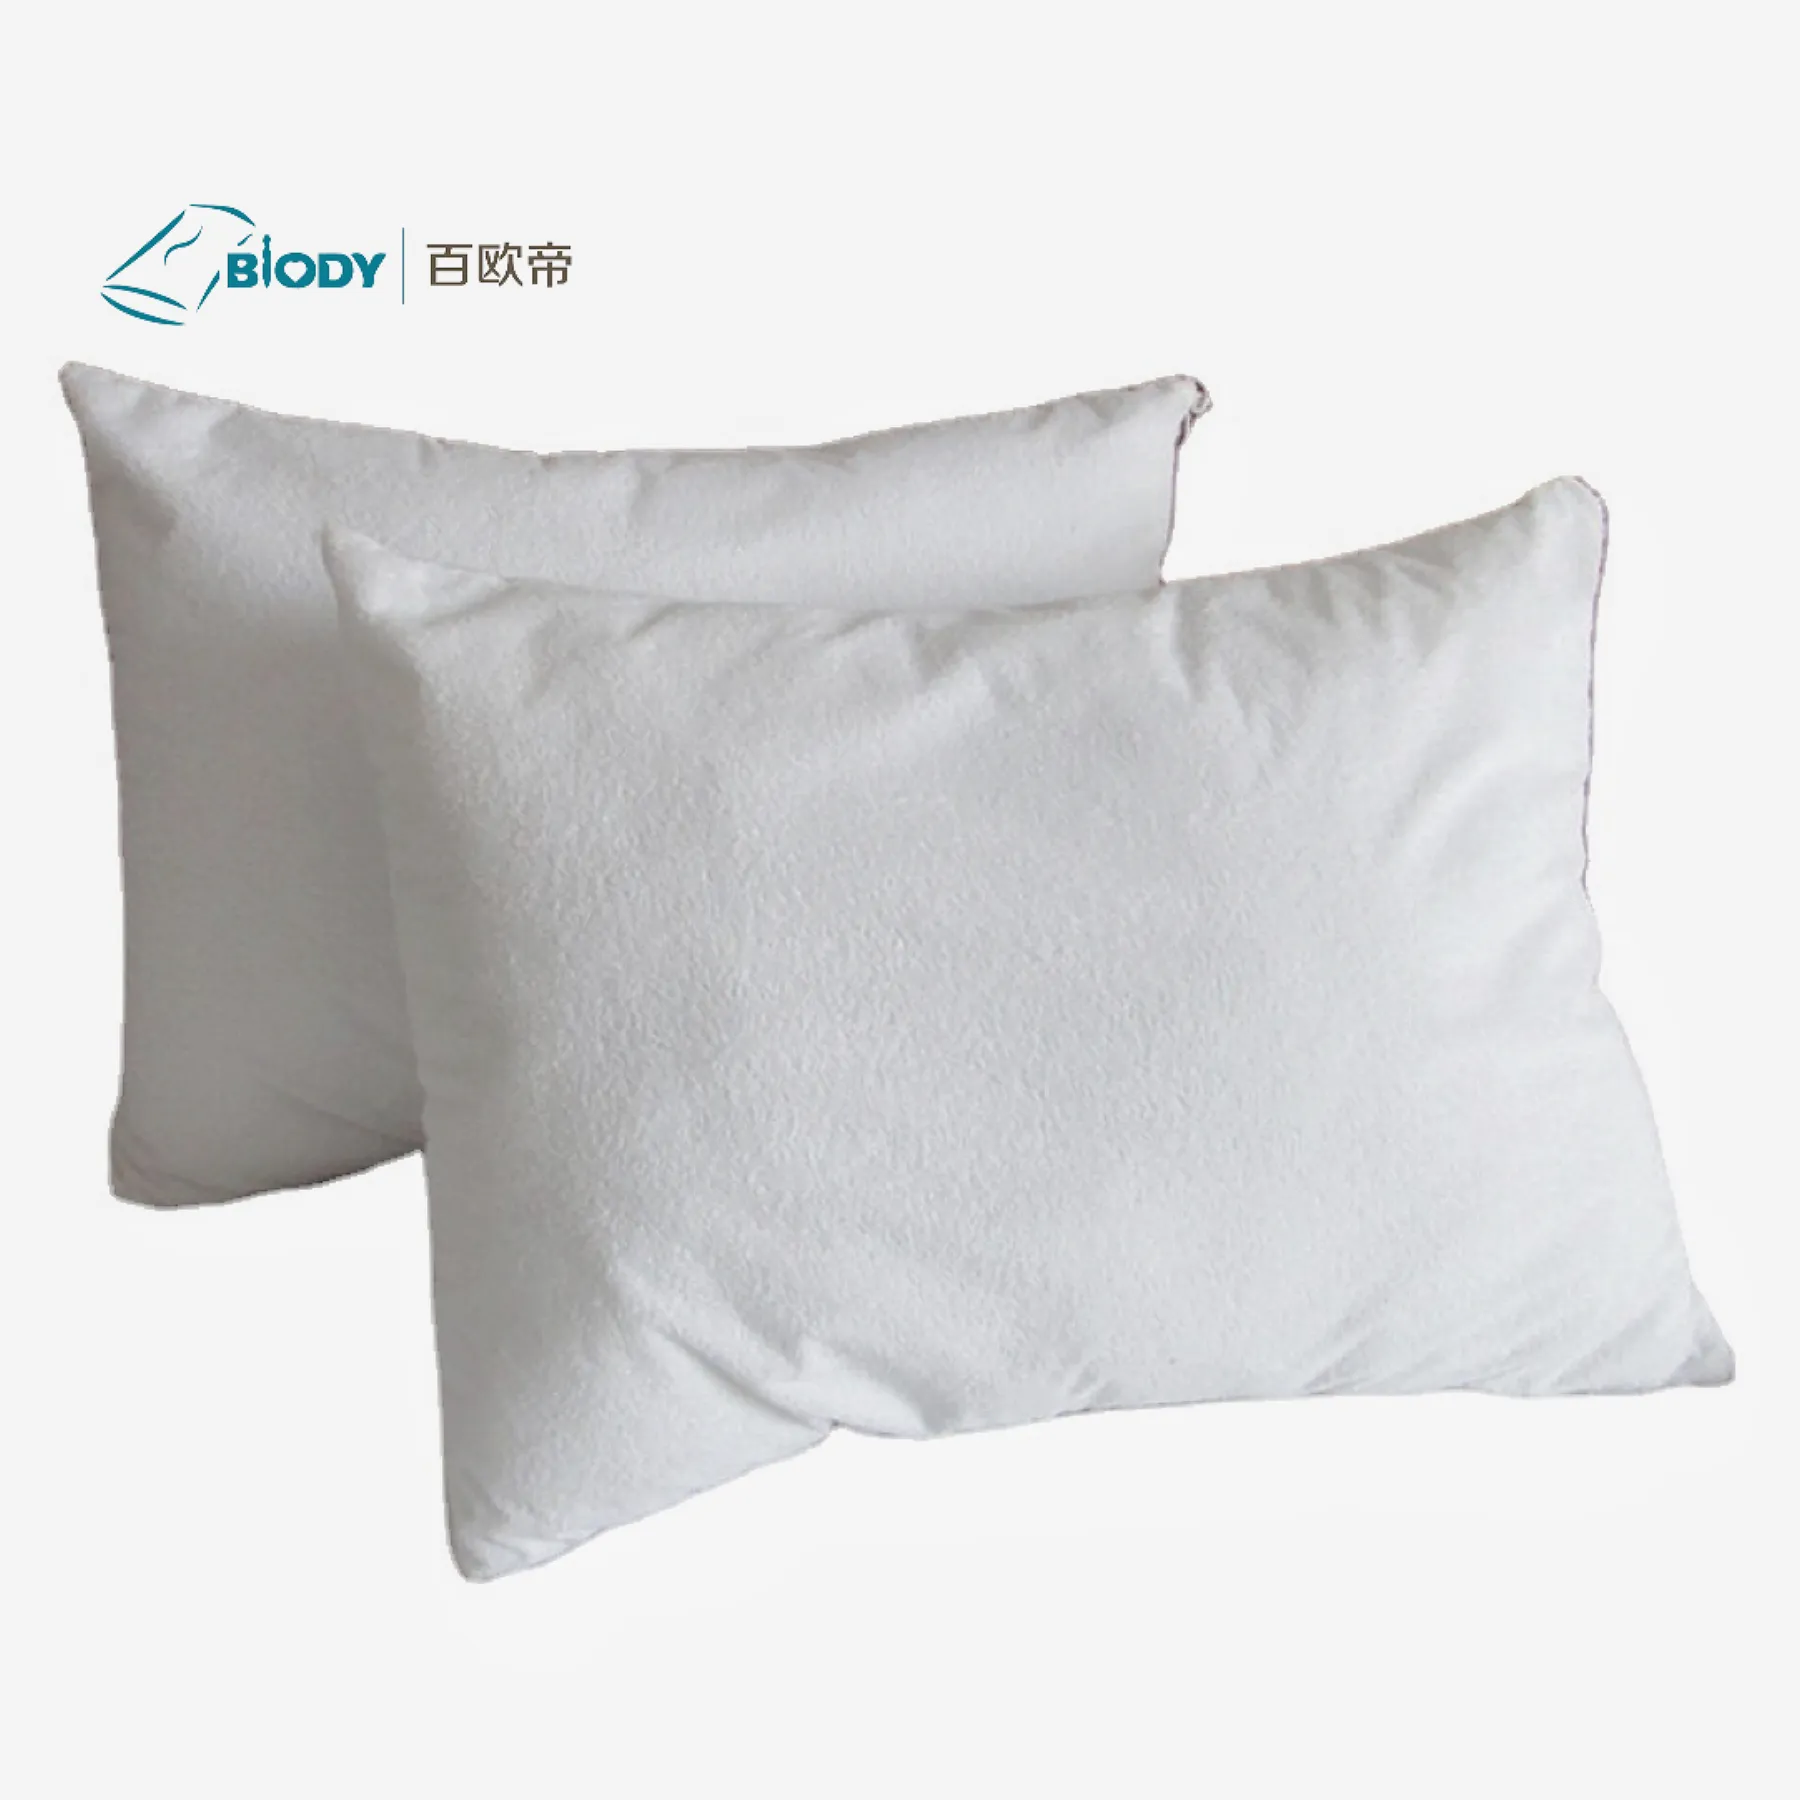 Customized package different quality Cotton Bed Bug and Dust Mite Mattress Protector Pillow Cover